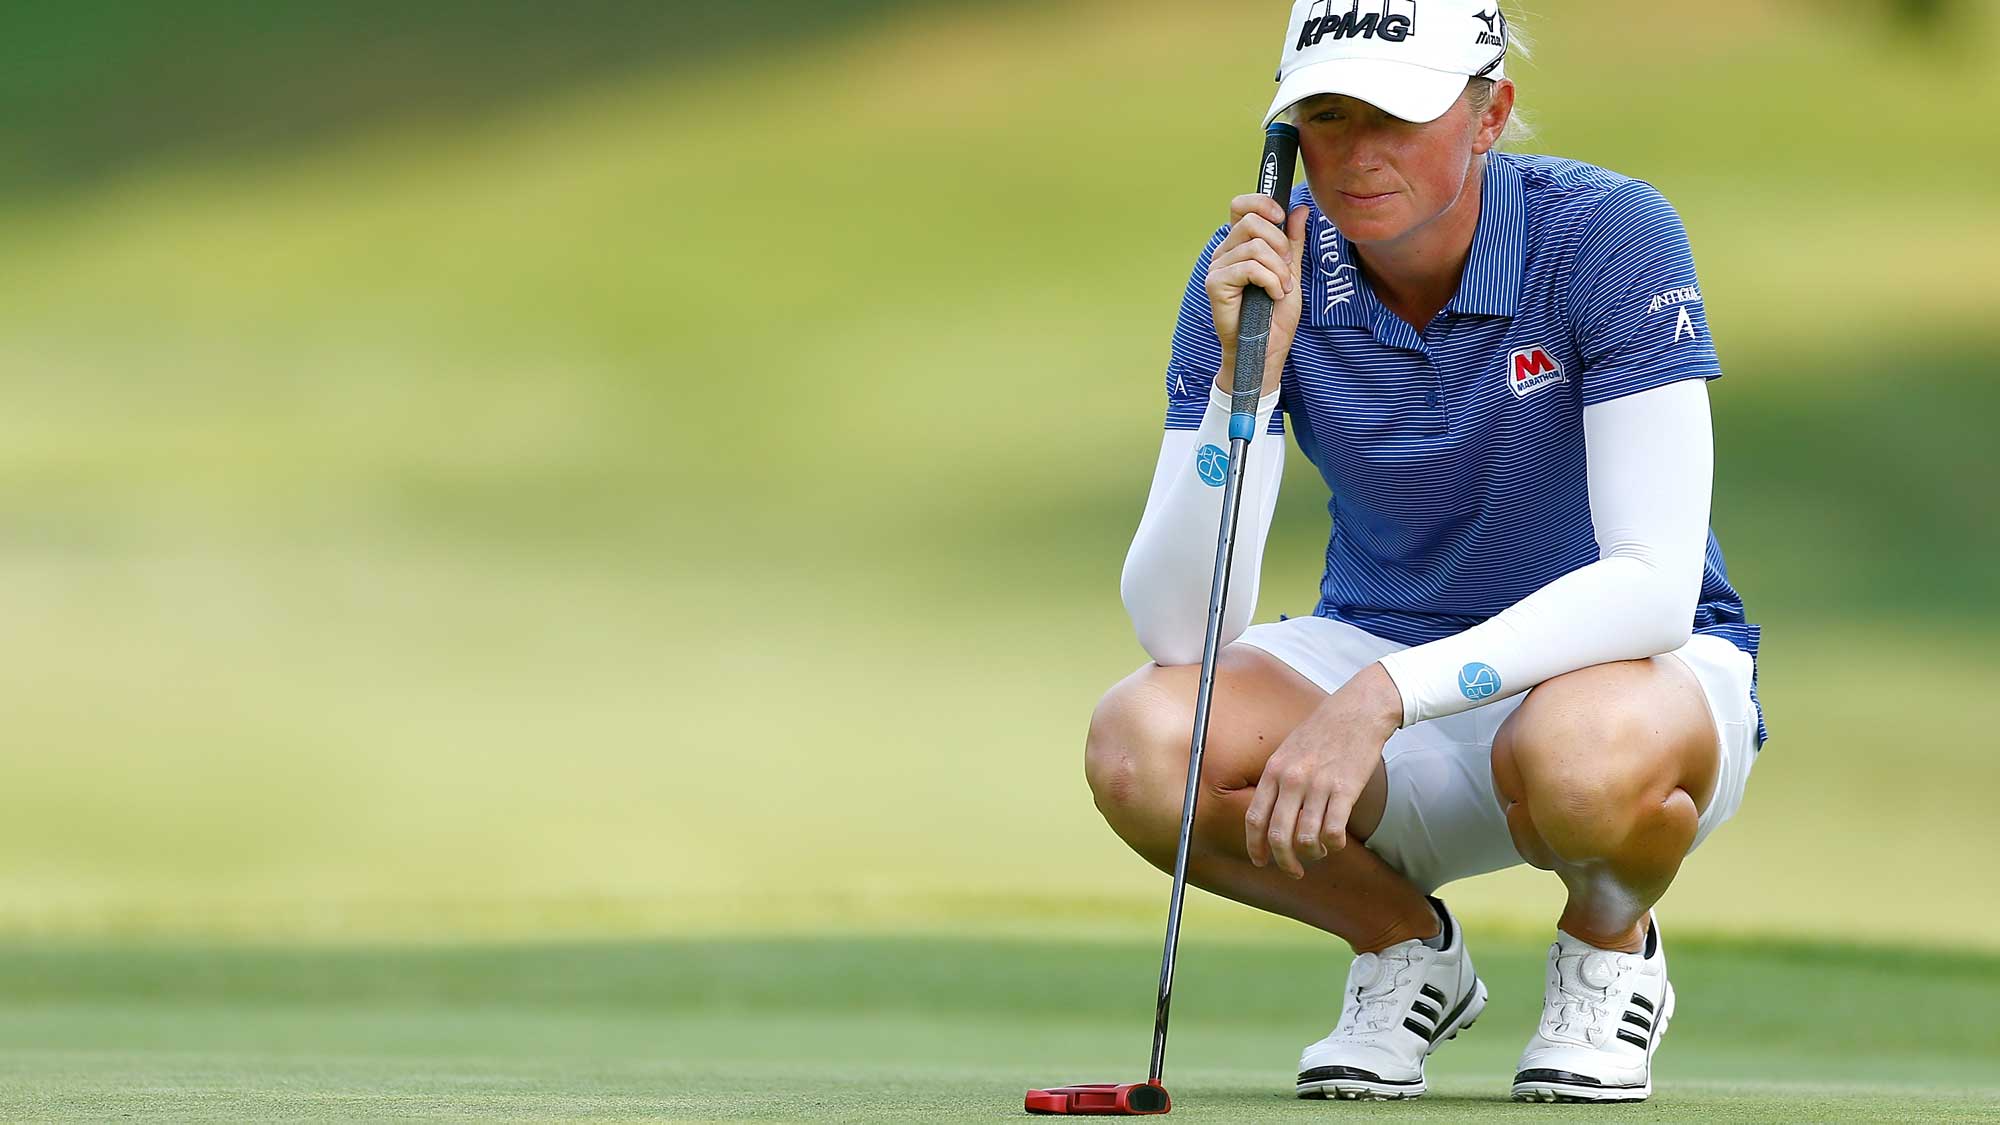 Stacy Lewis lines up a putt on 1st hole during the final round of the LPGA Cambia Portland Classic